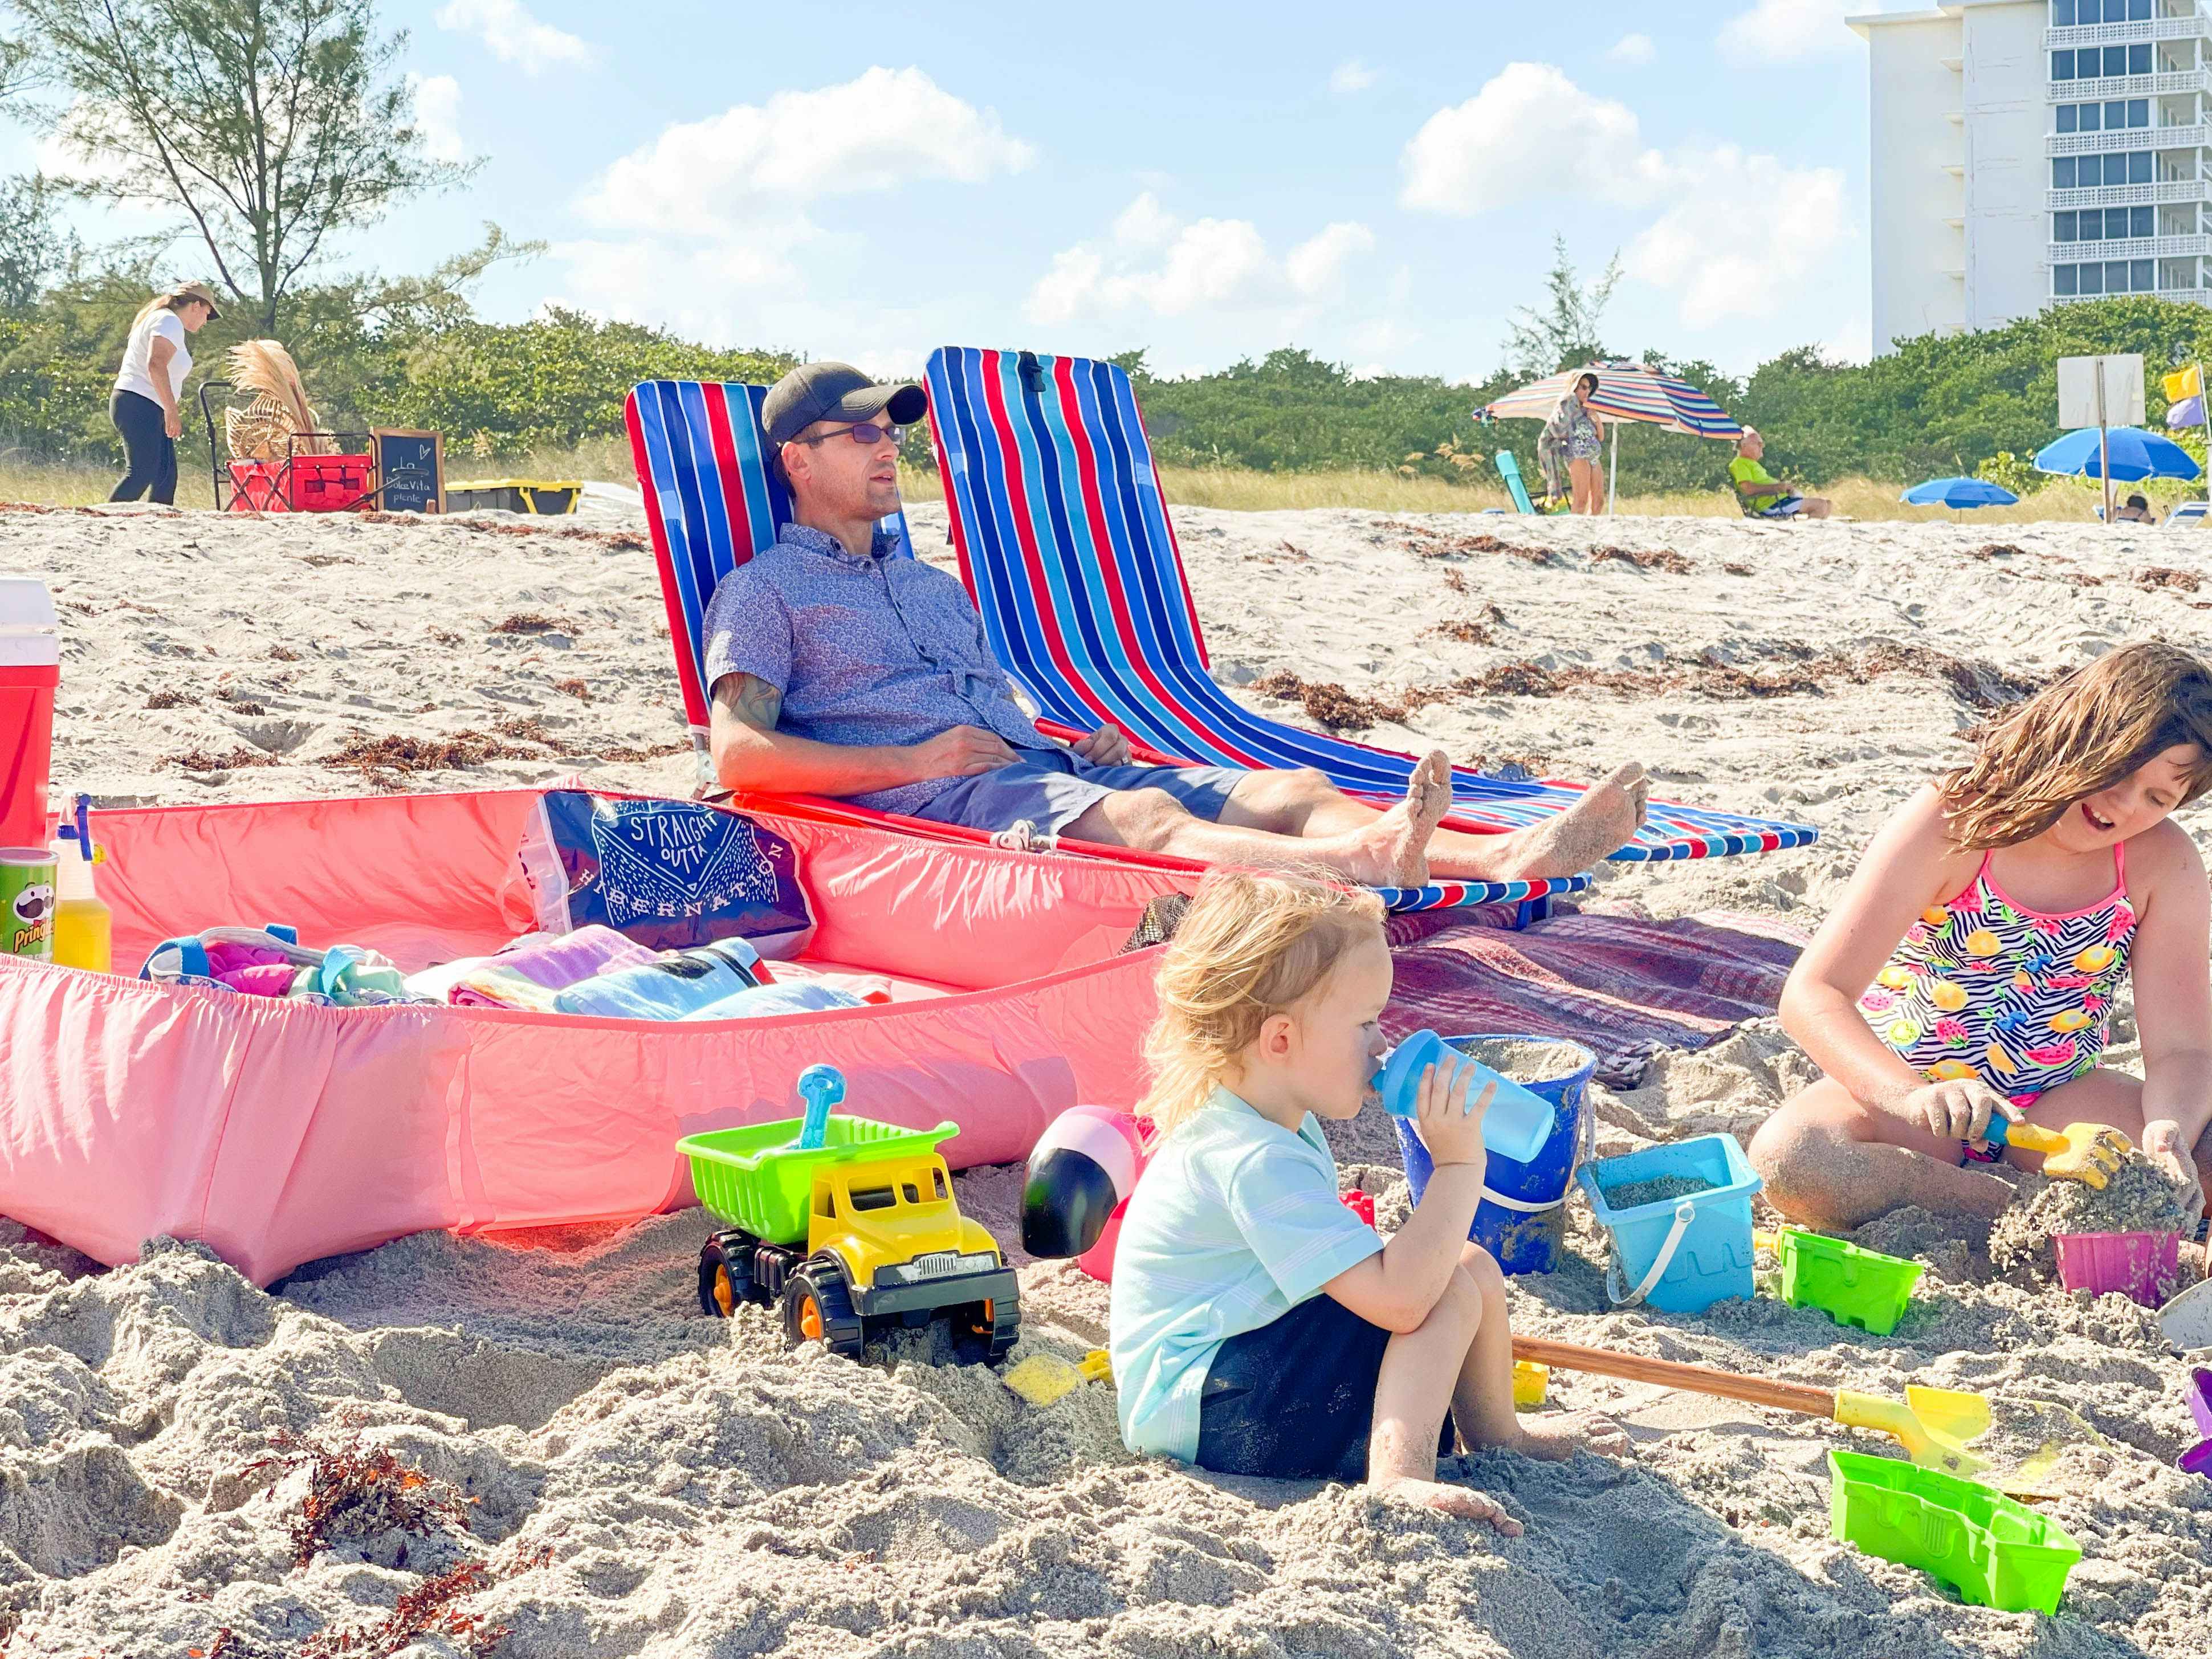 Man sitting in beach chair with to kids playing with toys in the sand